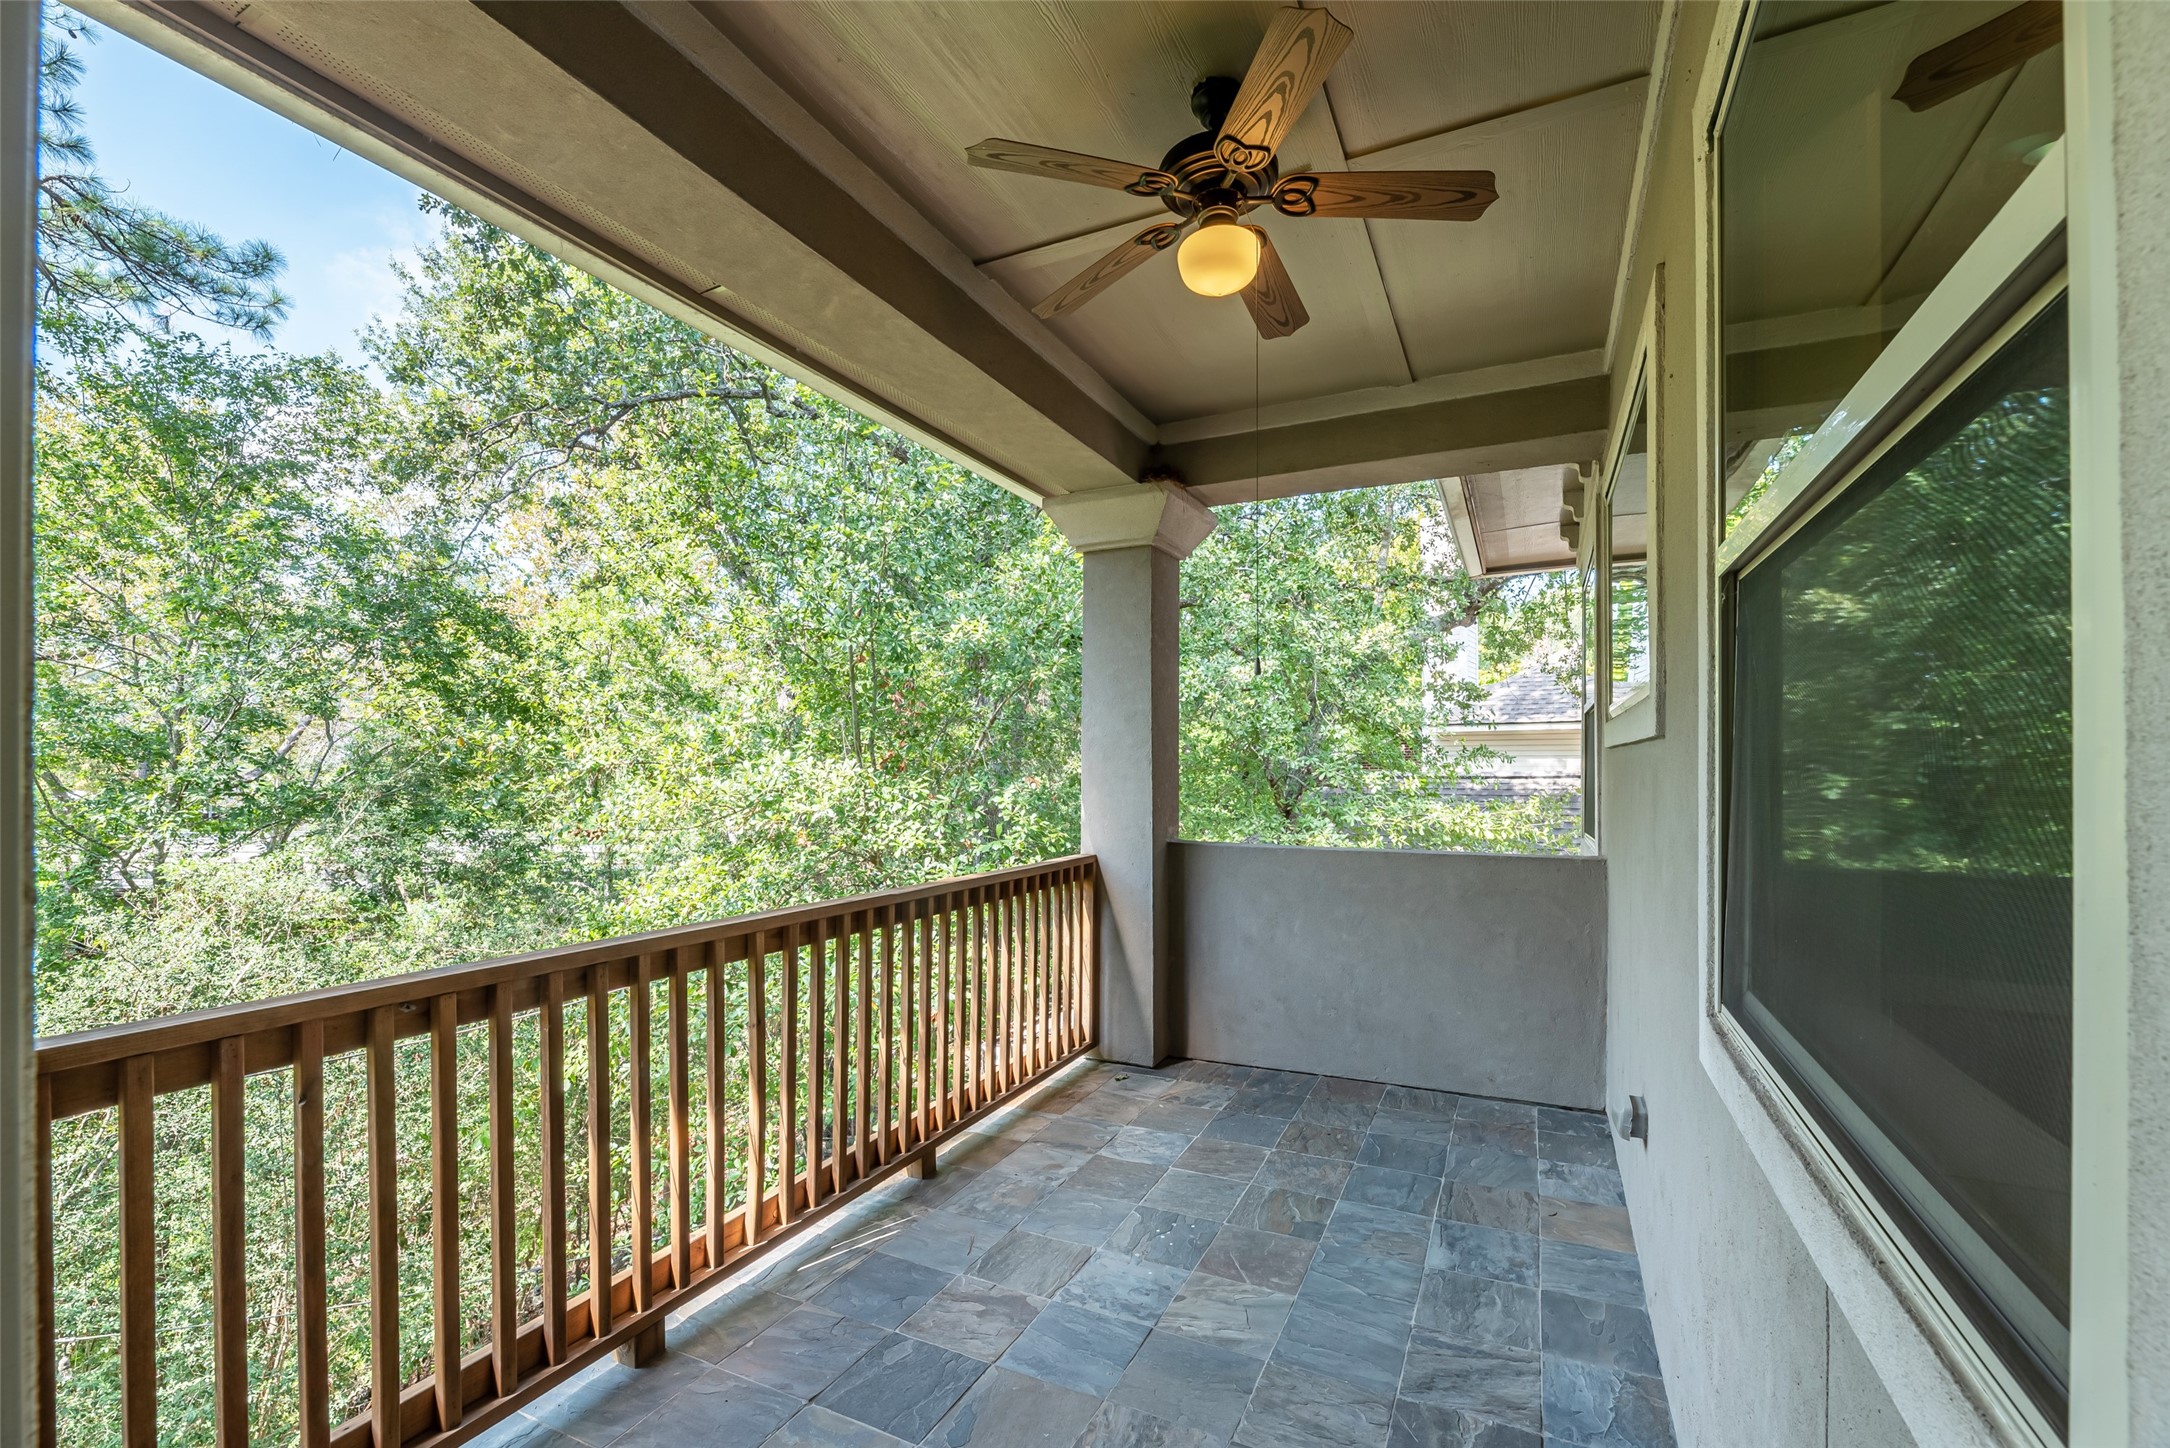 Primary suite balcony overlooking ravine areas and lush trees